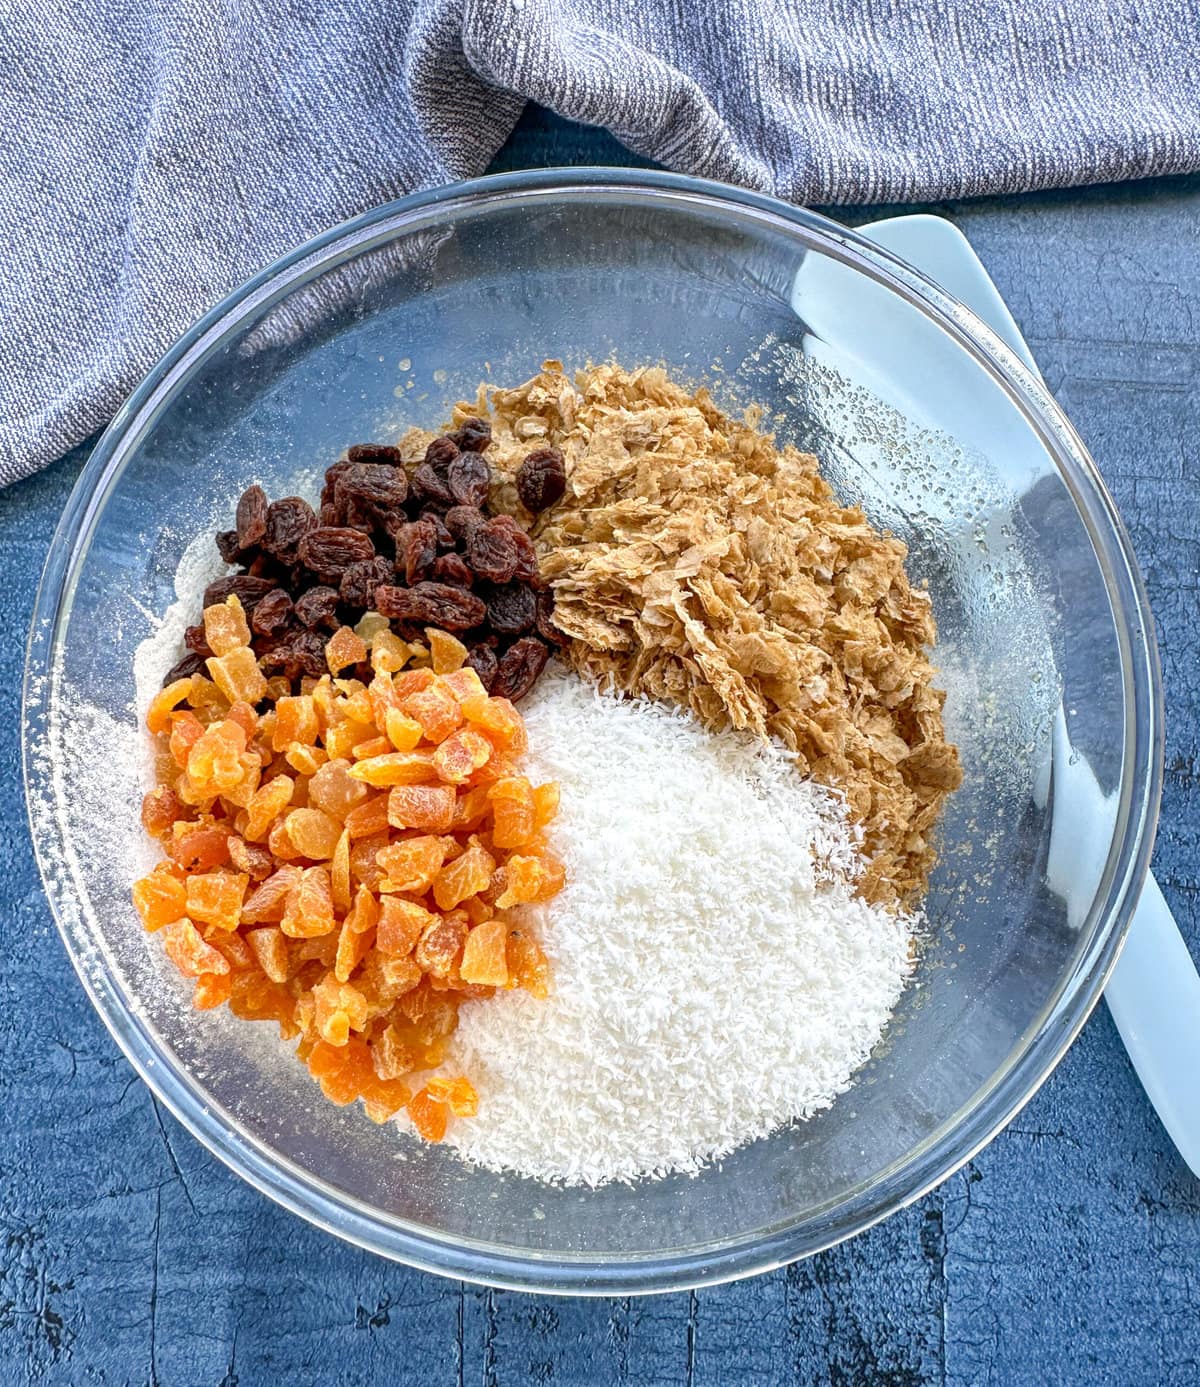 Adding the weetbix, coconut and dried fruit into a glass bowl to make energy bars